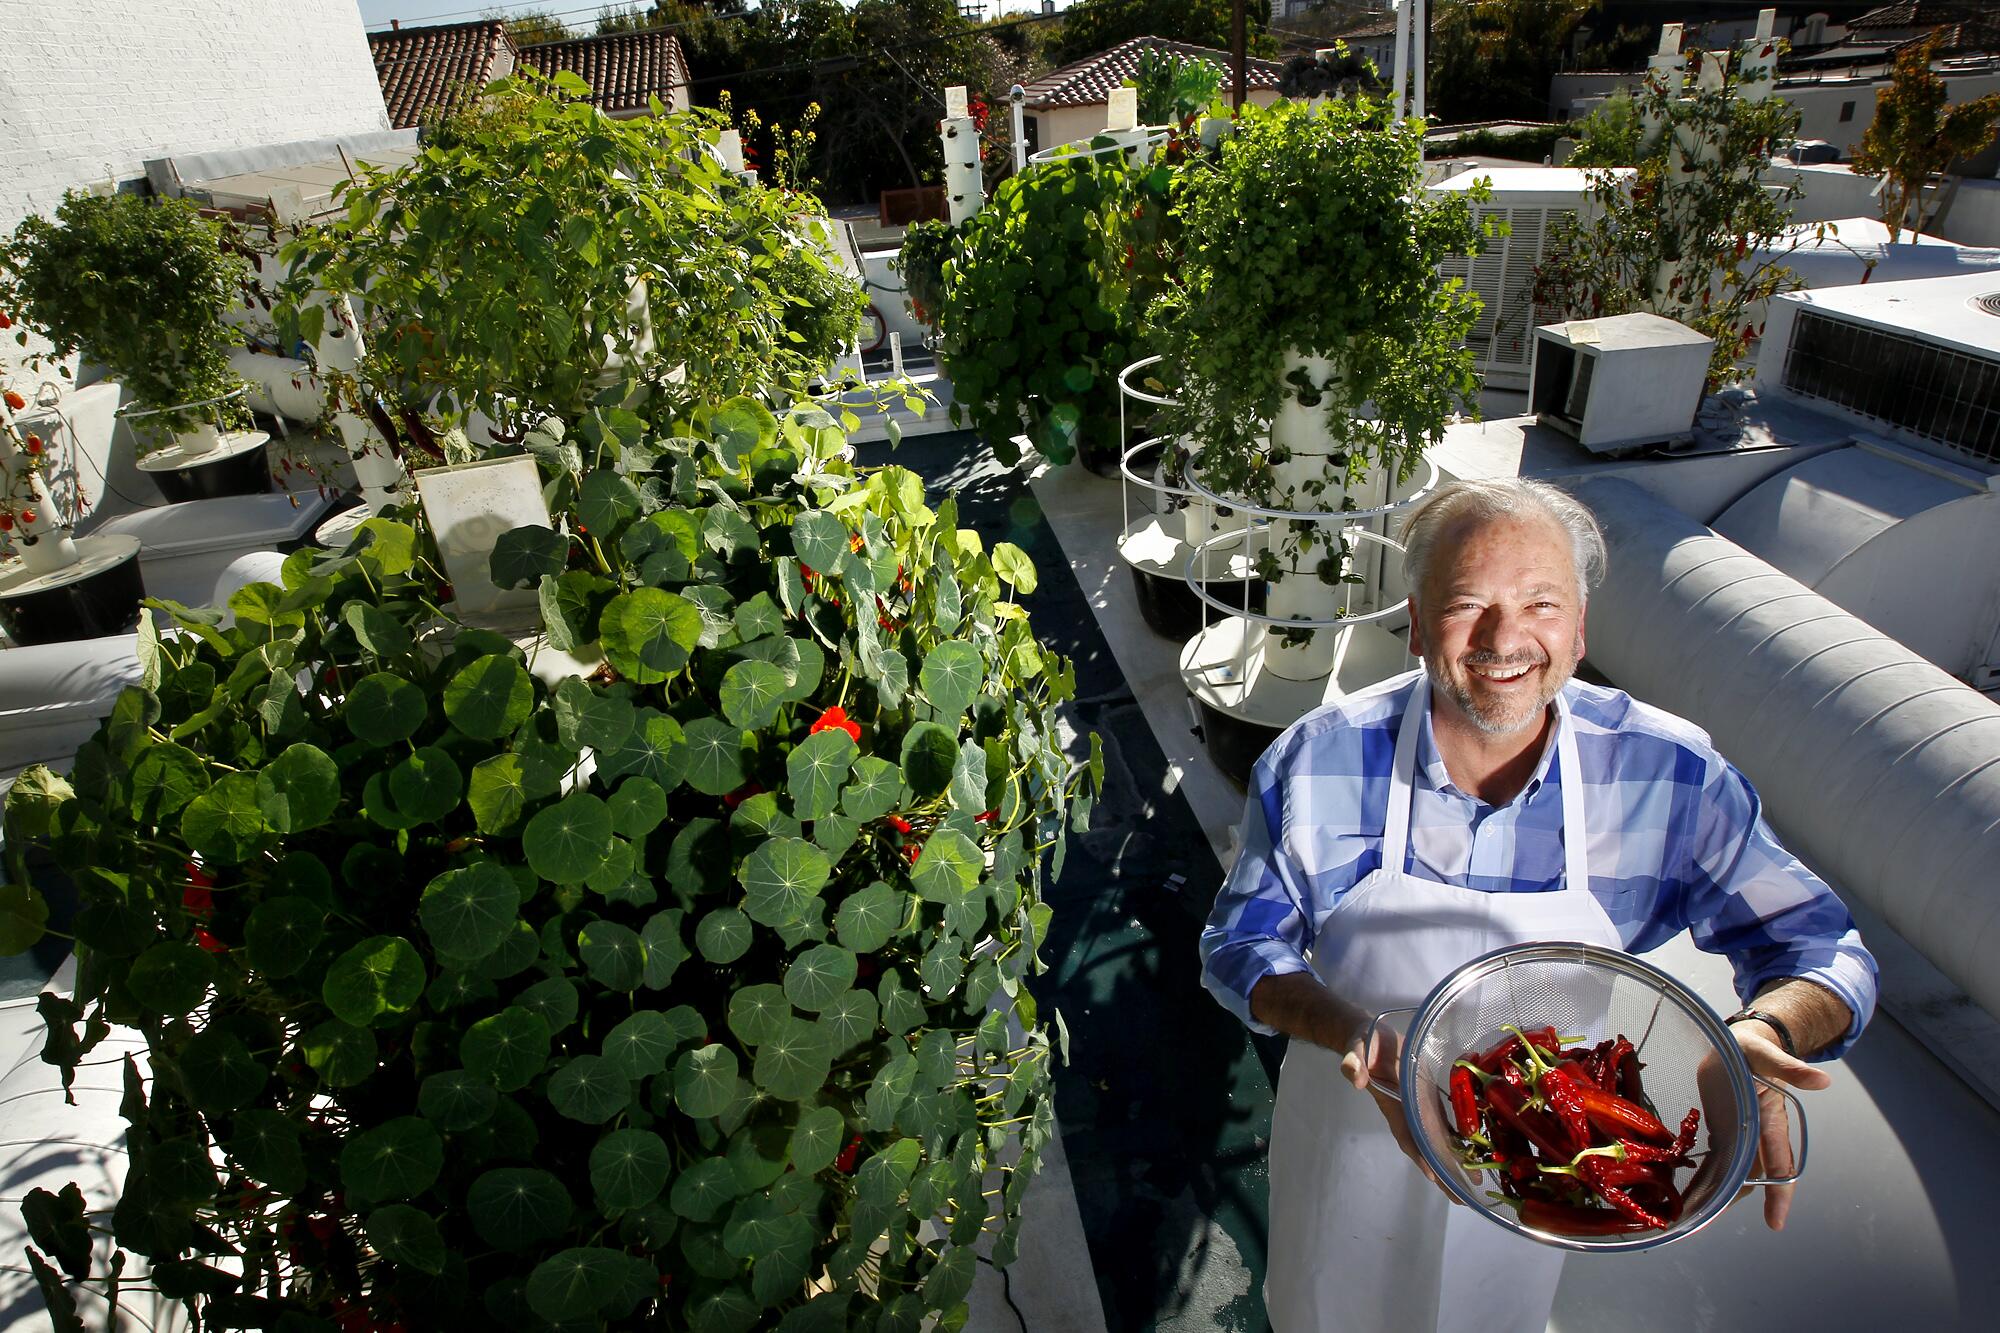 Rivera chef John Sedlar holds a container of chiles at his sustainable rooftop garden Cielo Verde.